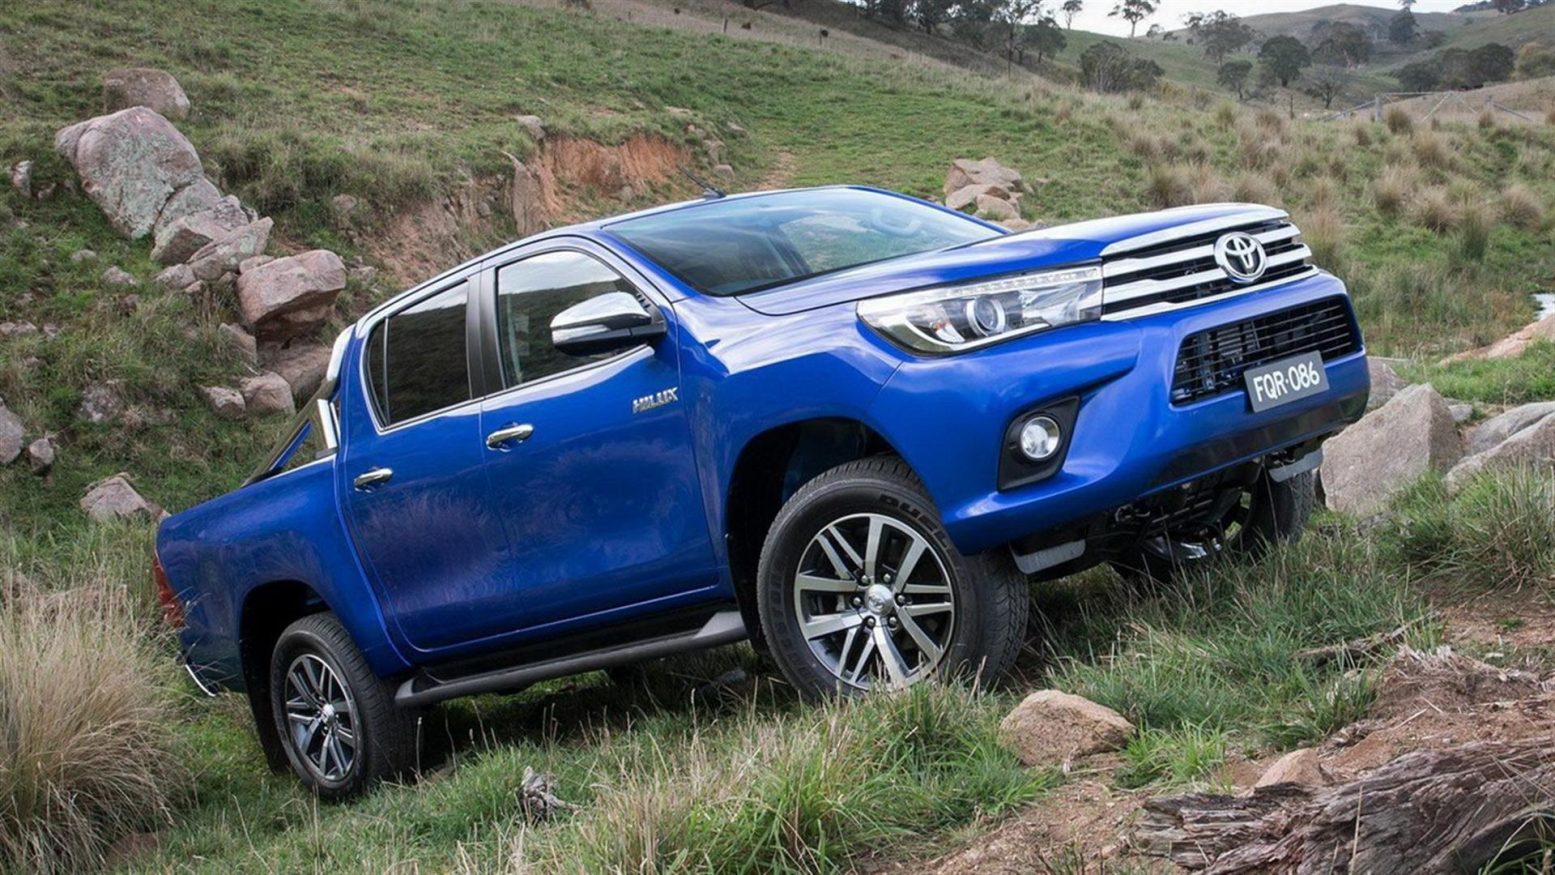 2019 Toyota Hilux - Hilux Price In Nepal , HD Wallpaper & Backgrounds